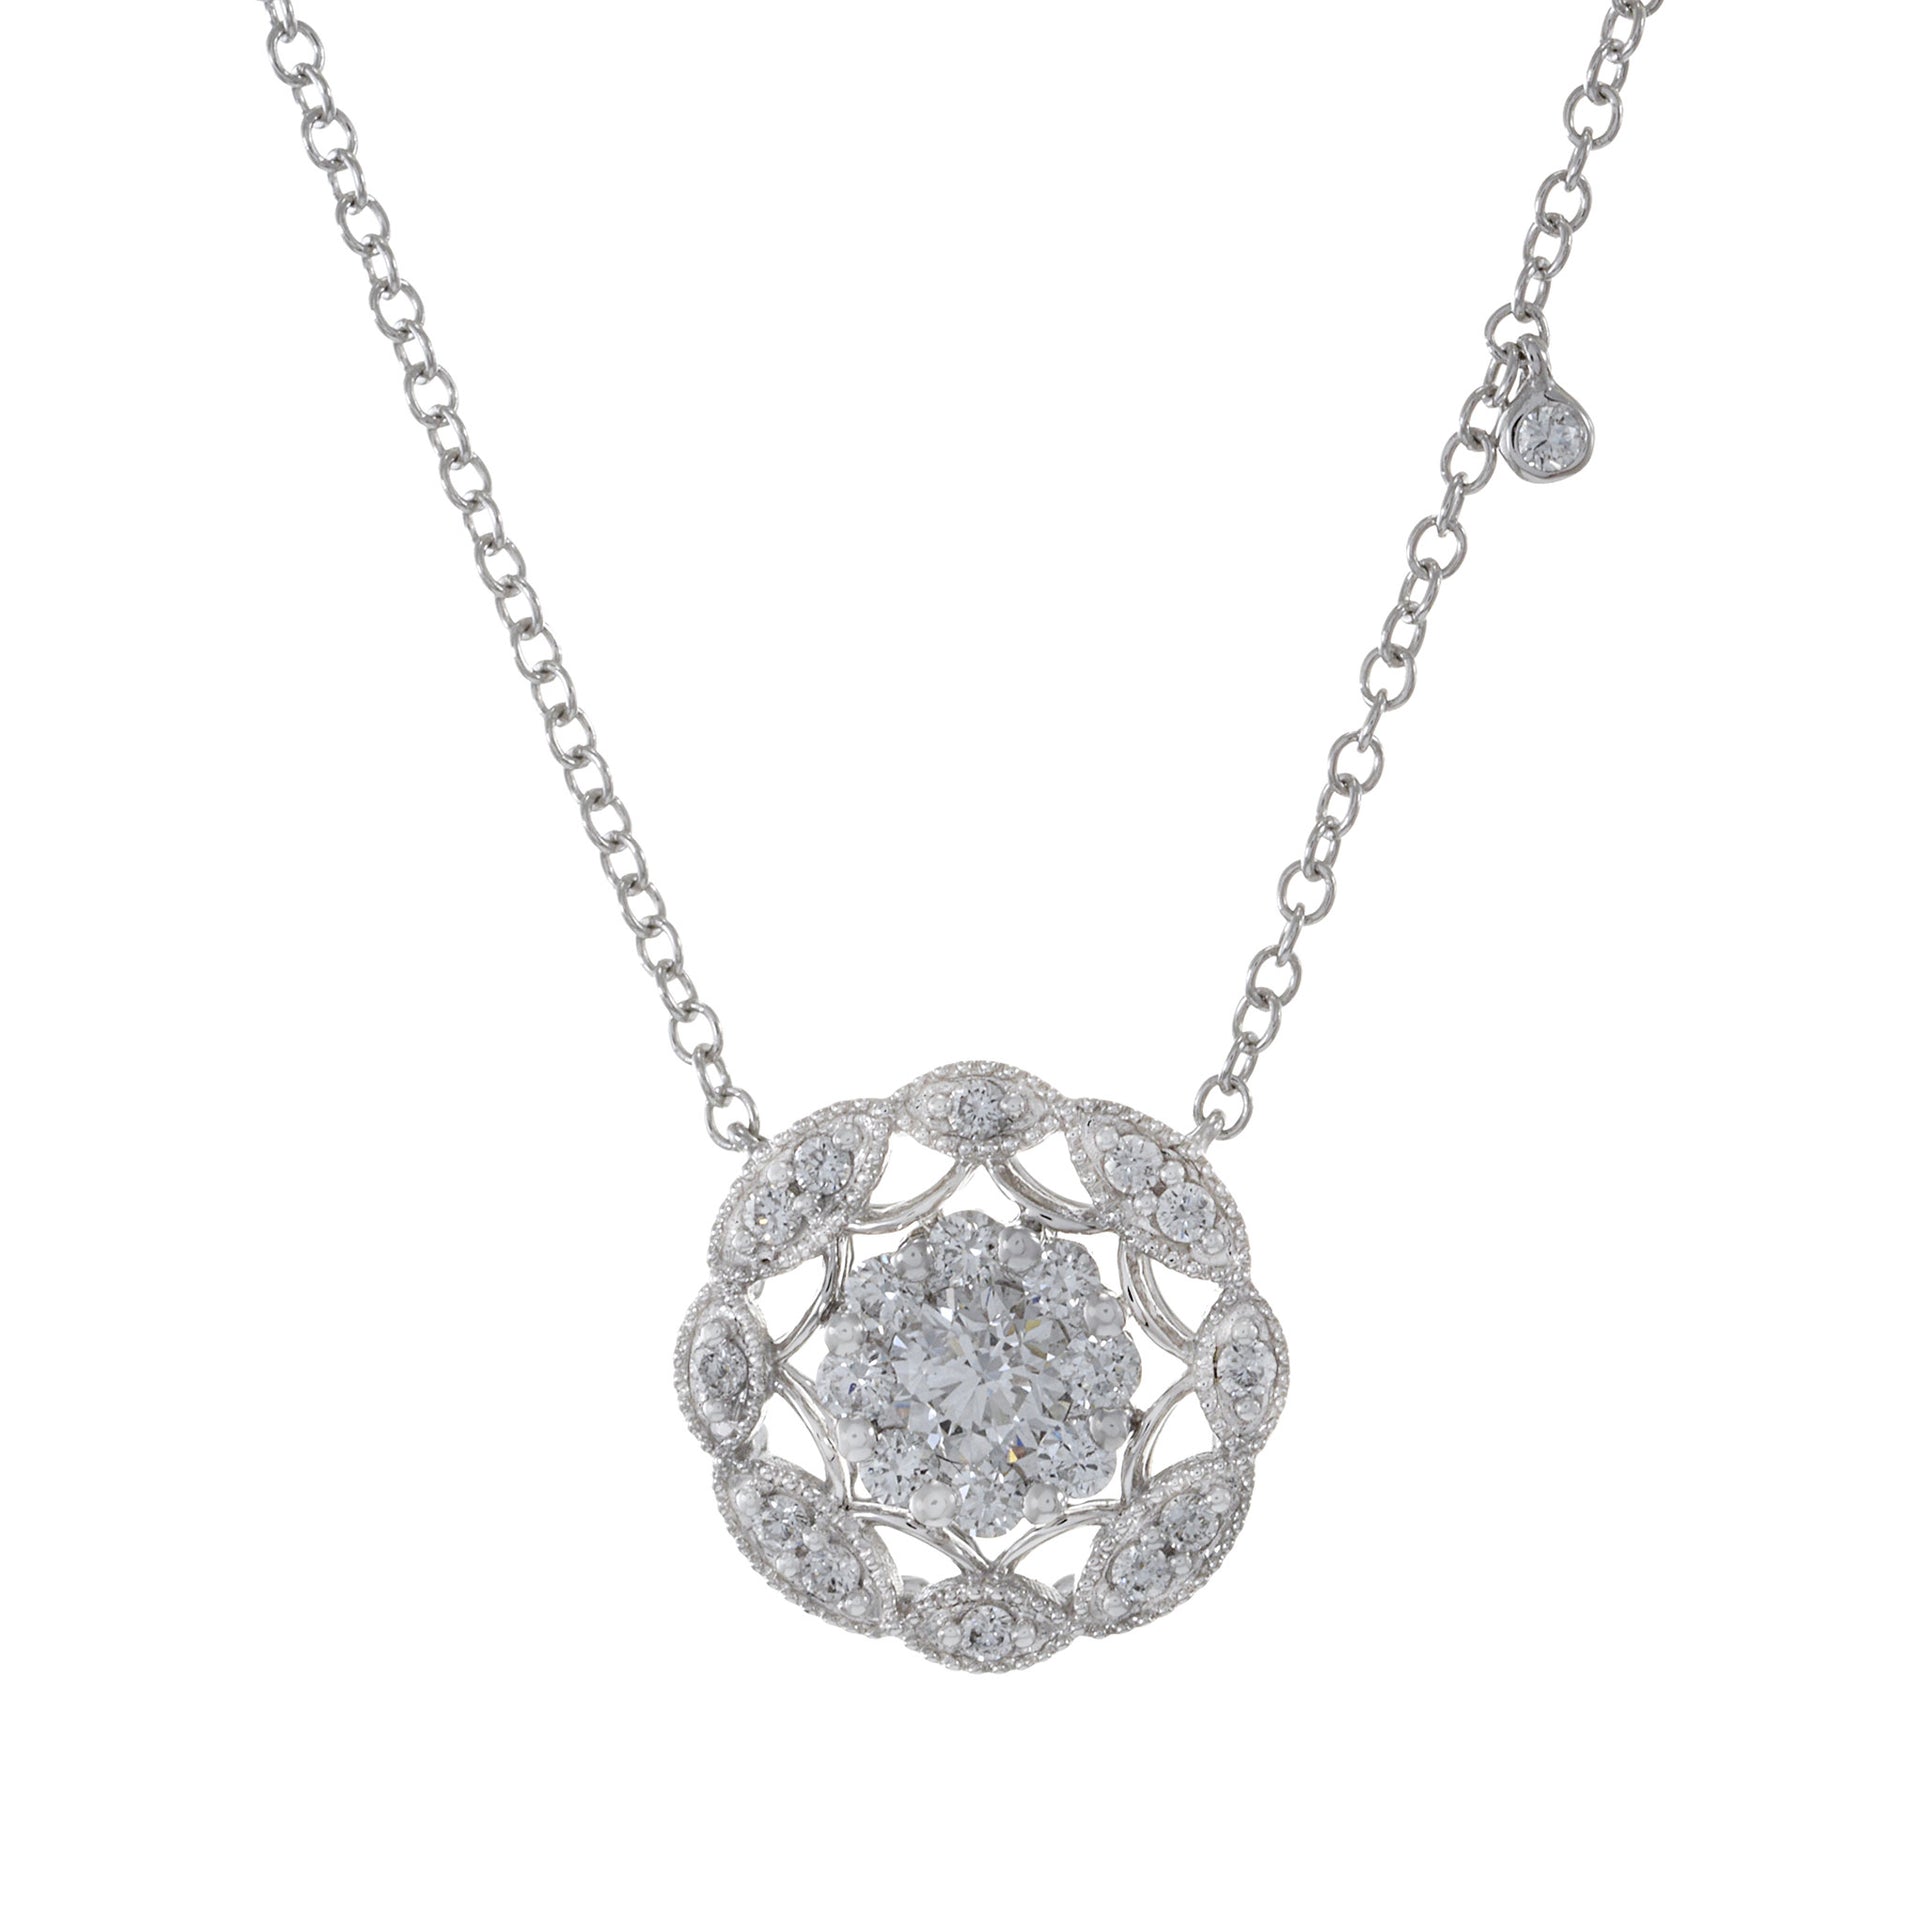 18KT White Gold Cluster Diamond Necklace